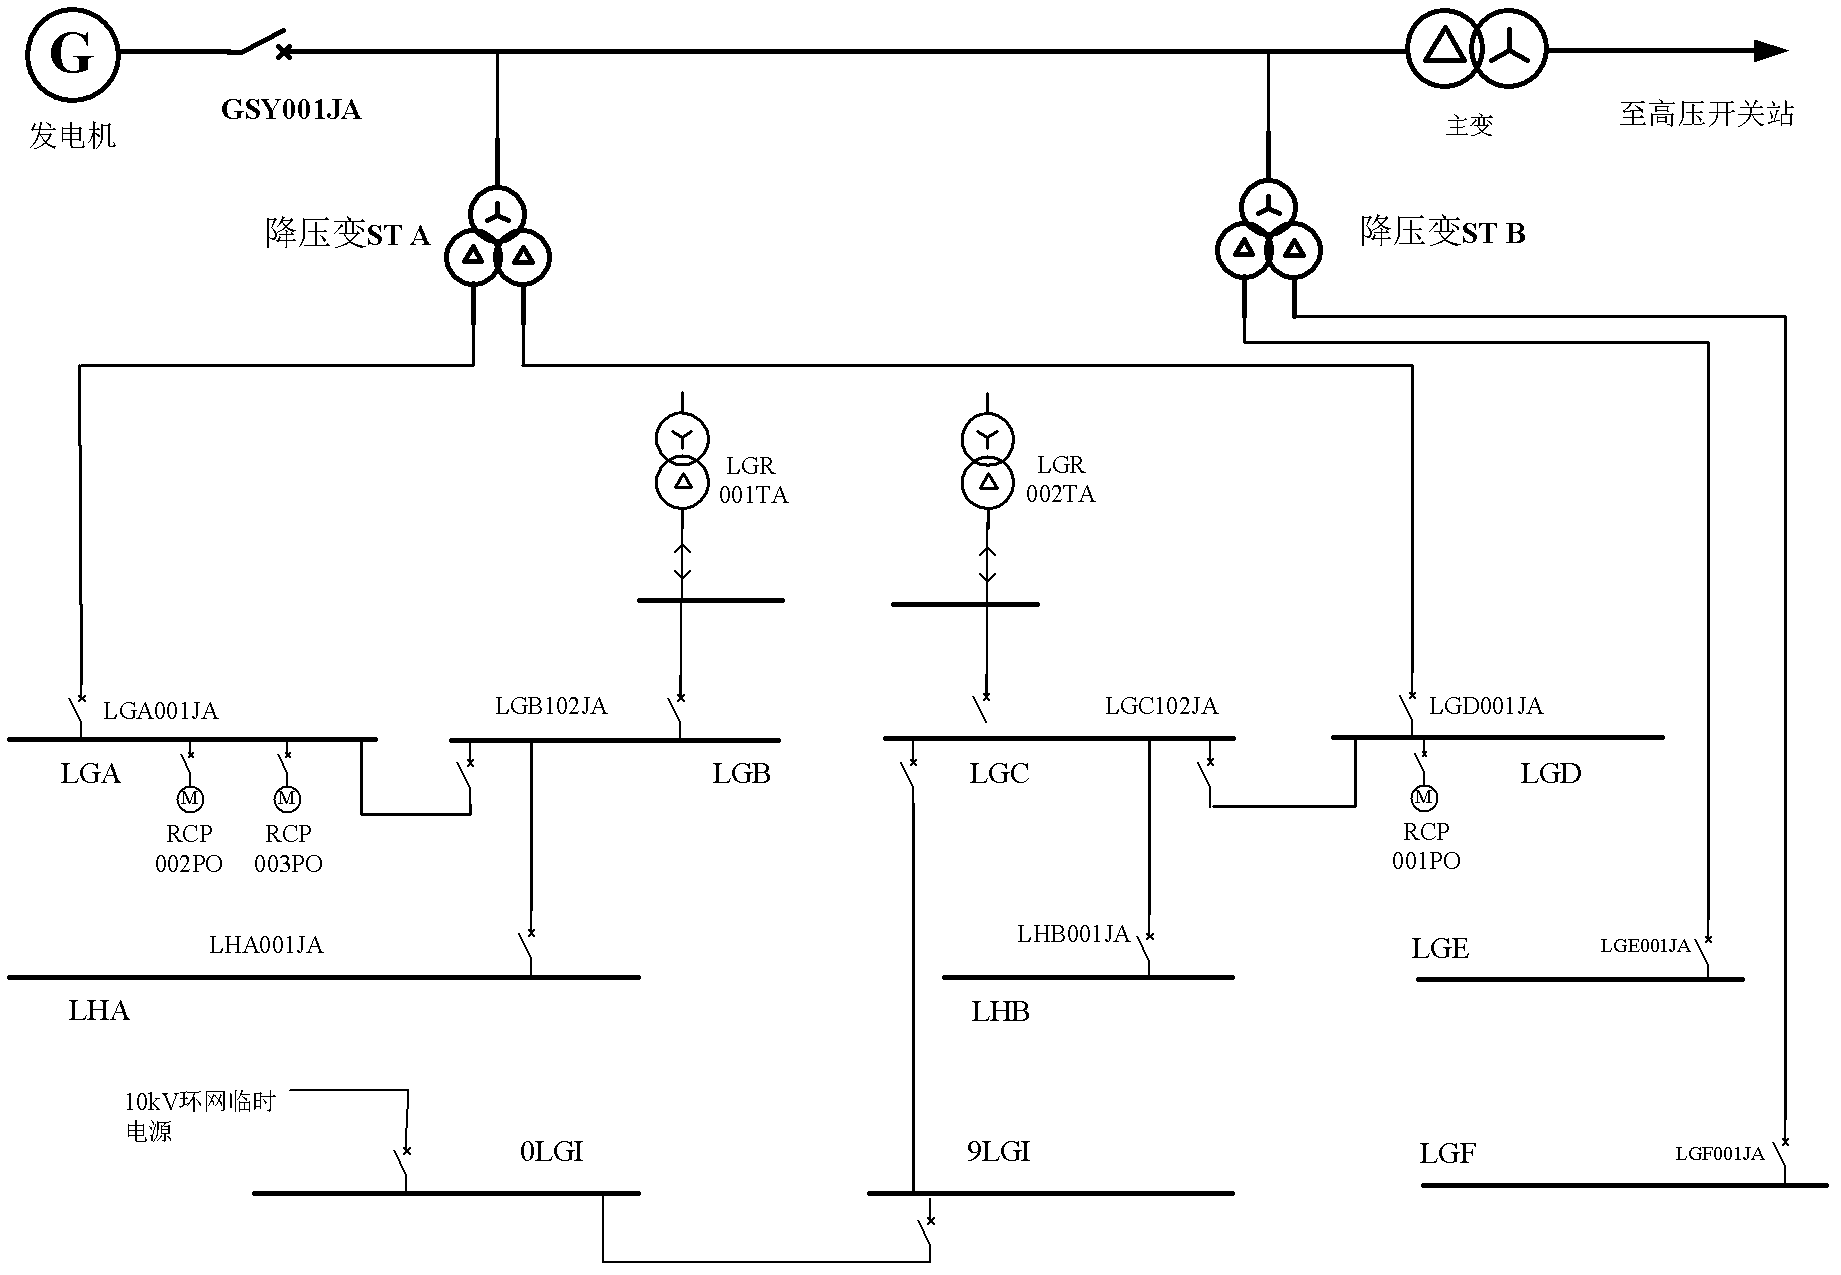 Power supply method for nuclear power plant cold-state function test